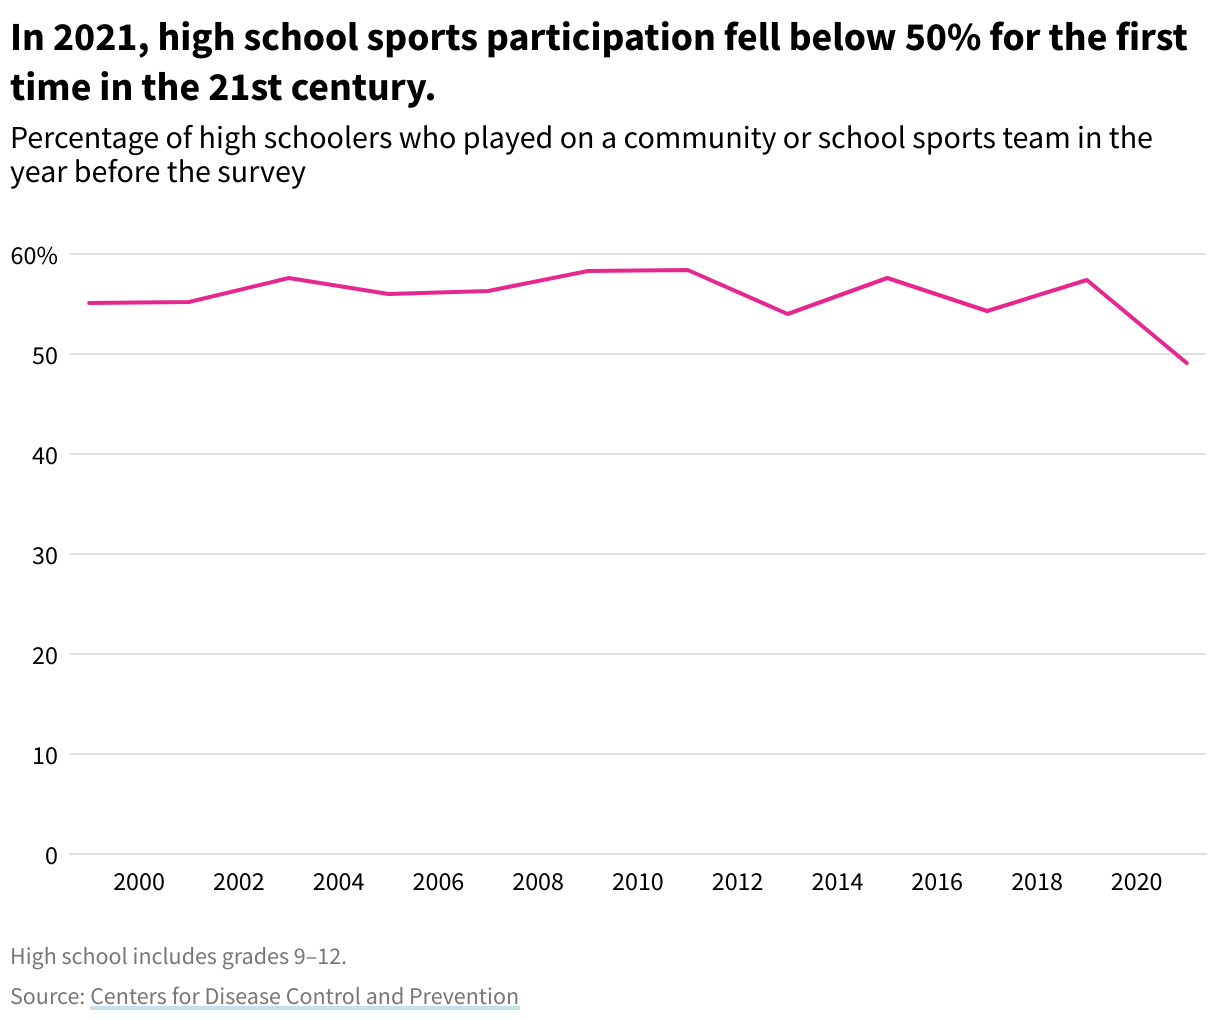 A line chart showing the percentage of high schoolers who played on a sports team. After remaining between 54% and 59% from 1999 to 2019, high school sports participation fell to 49.1% in 2021.